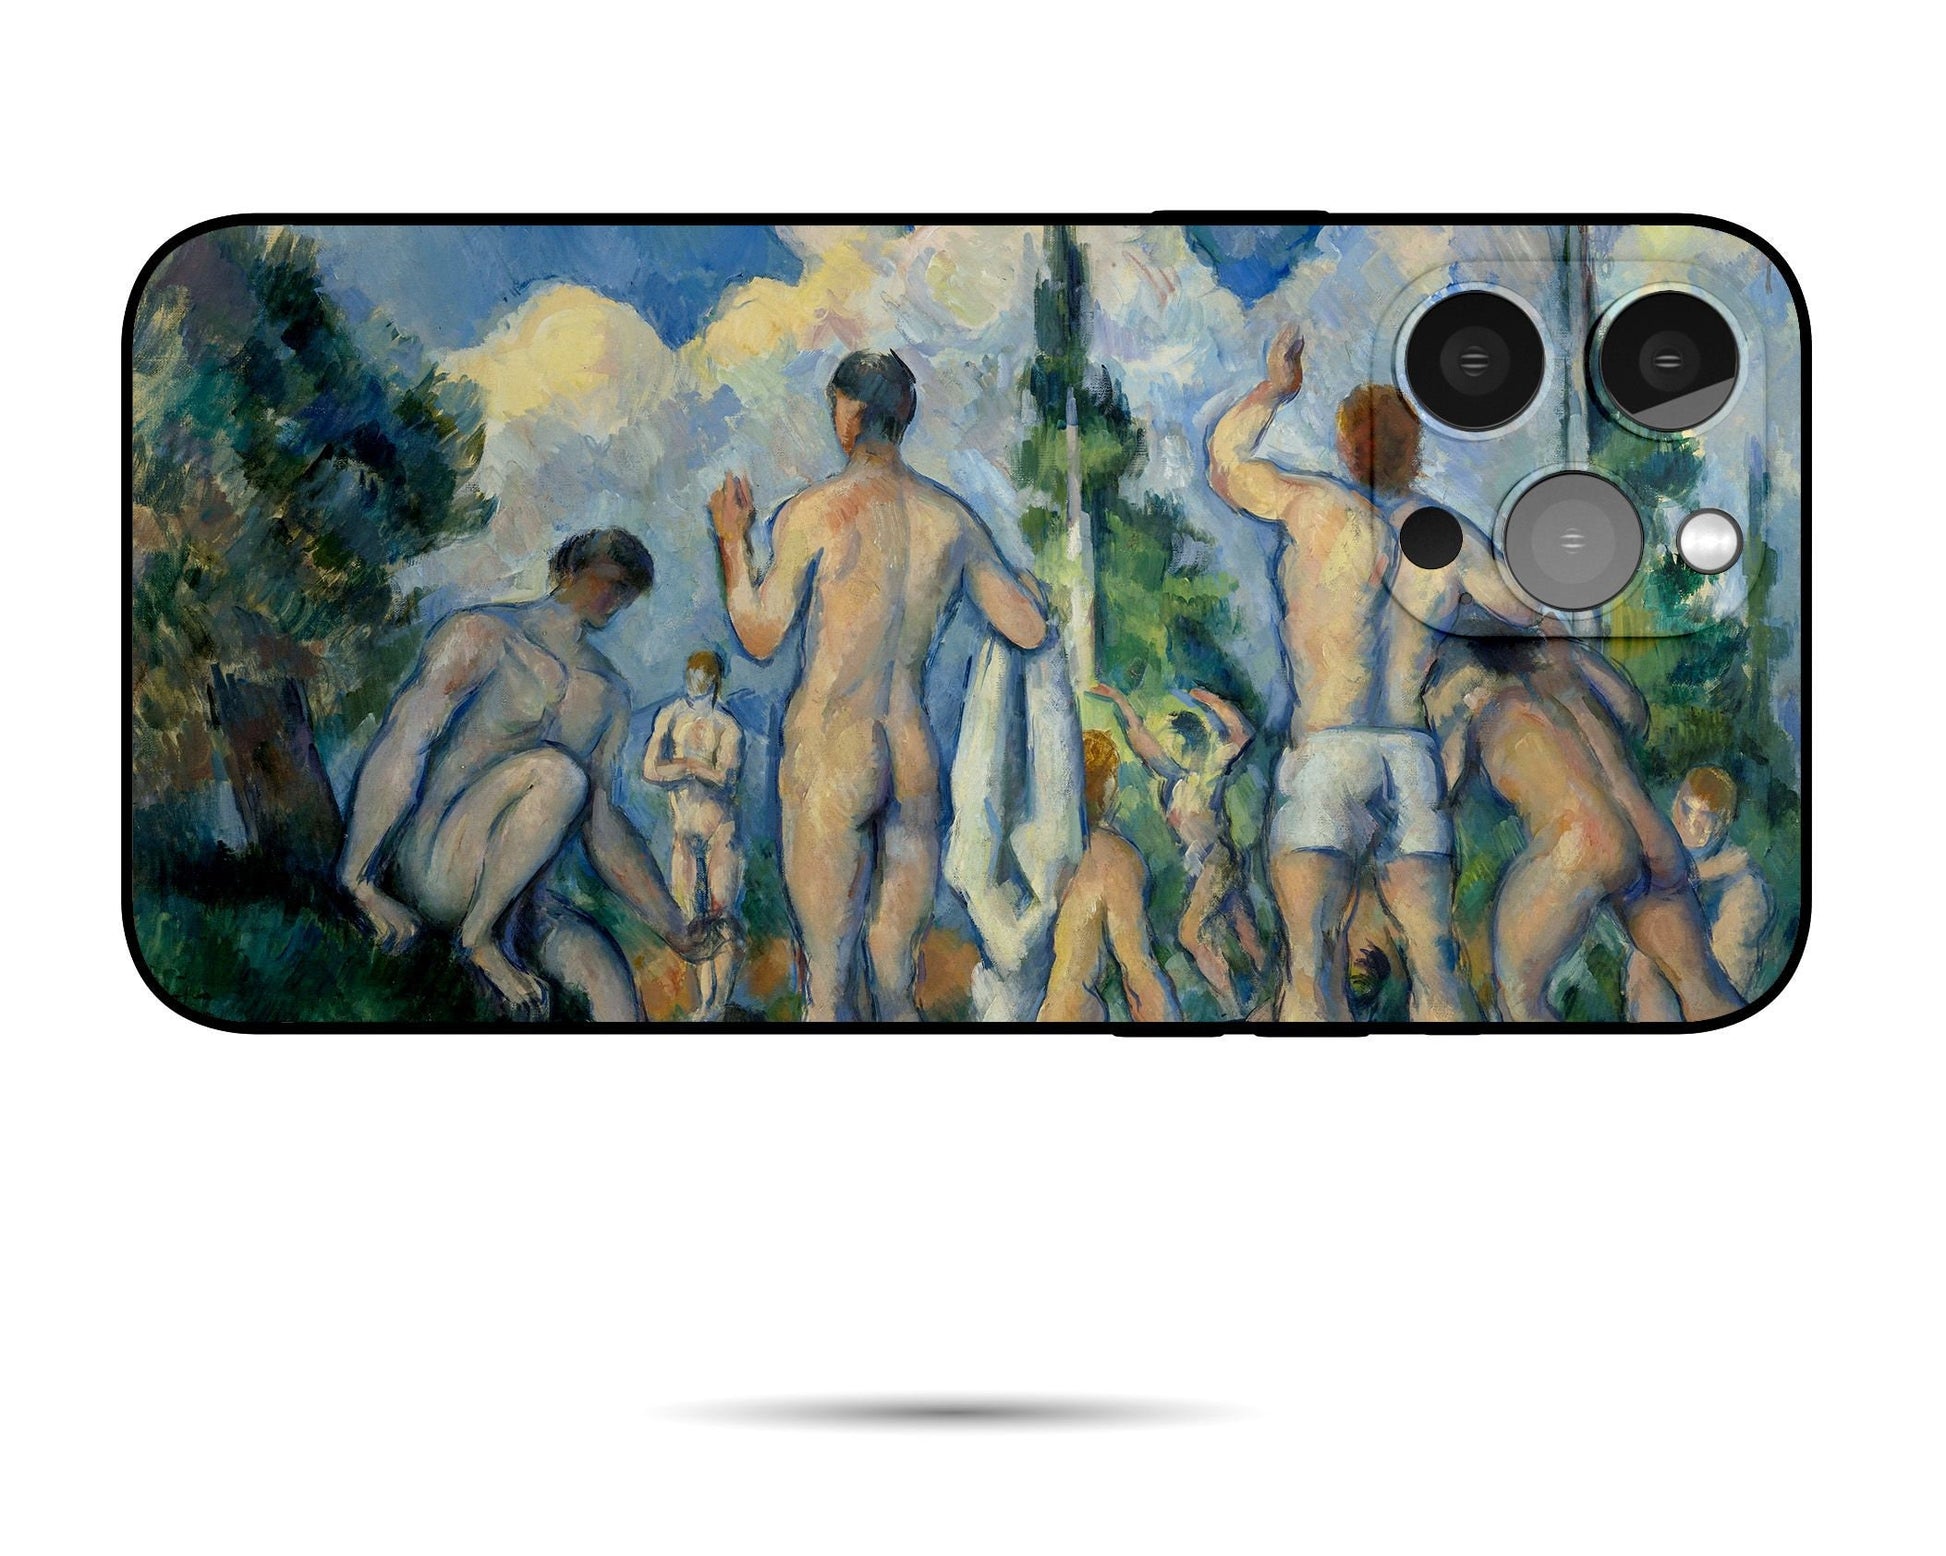 Iphone Case Of Paul Cézanne Famous painting Large Bathers, Iphone 11 Case, Iphone Xs, Aesthetic Phone Case, Birthday Gift, Iphone Case Matte